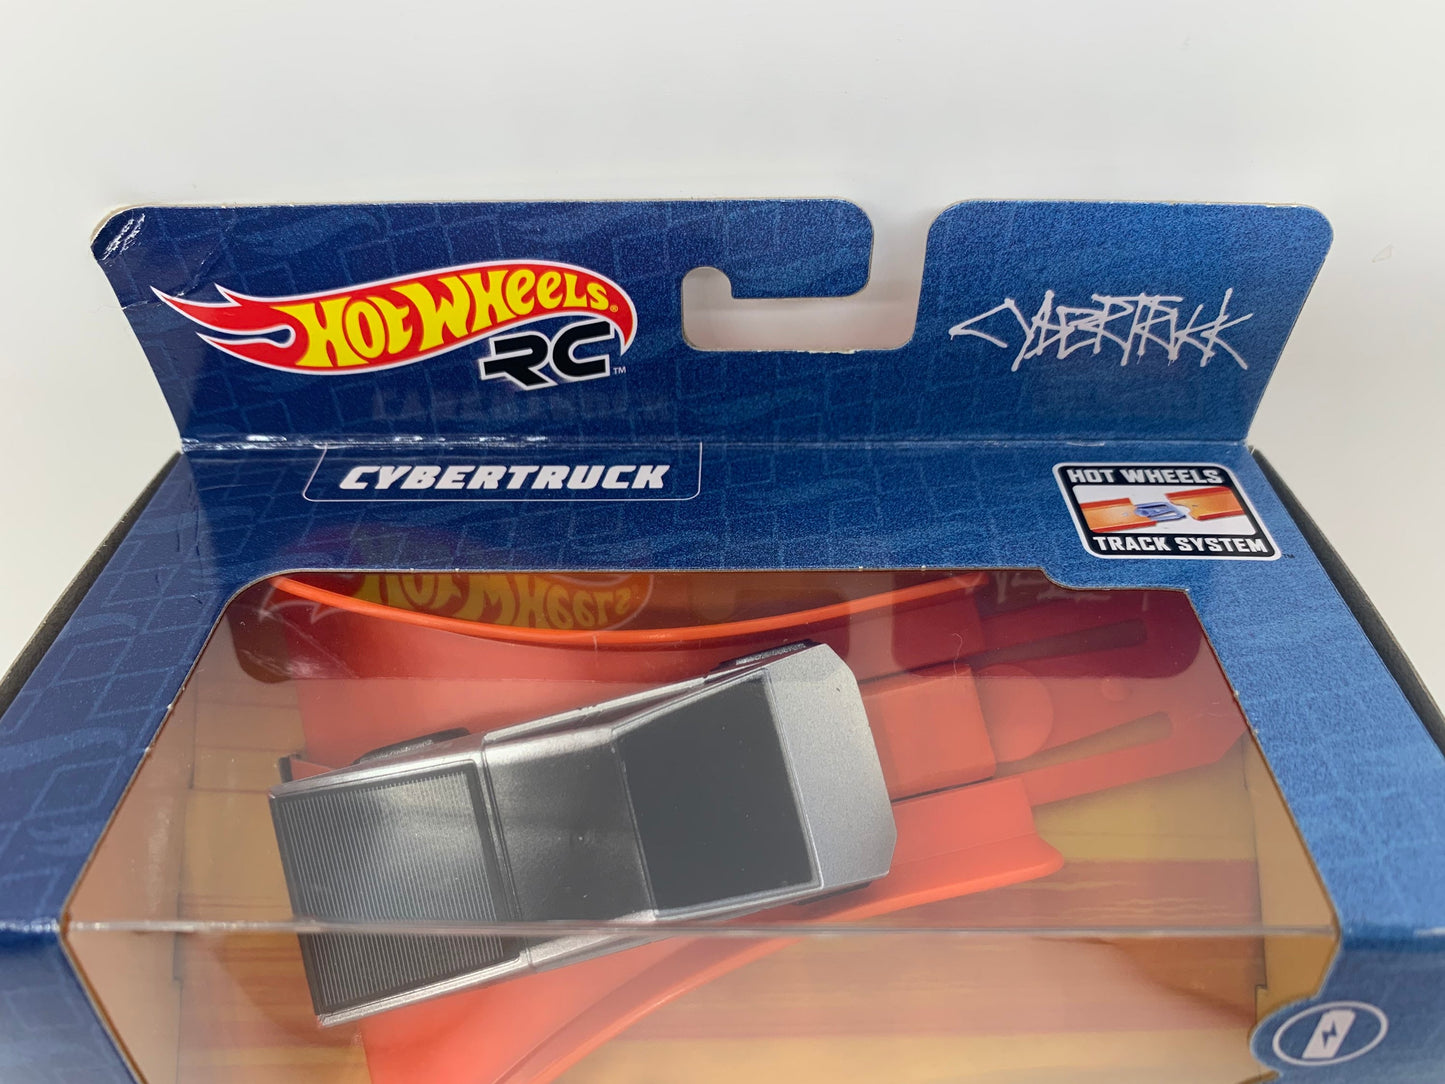 Hot Wheels Cybertruck Silver RC Perfect Birthday Gift Miniature Collectable Scale Model Remote Control Tesla Toy Car